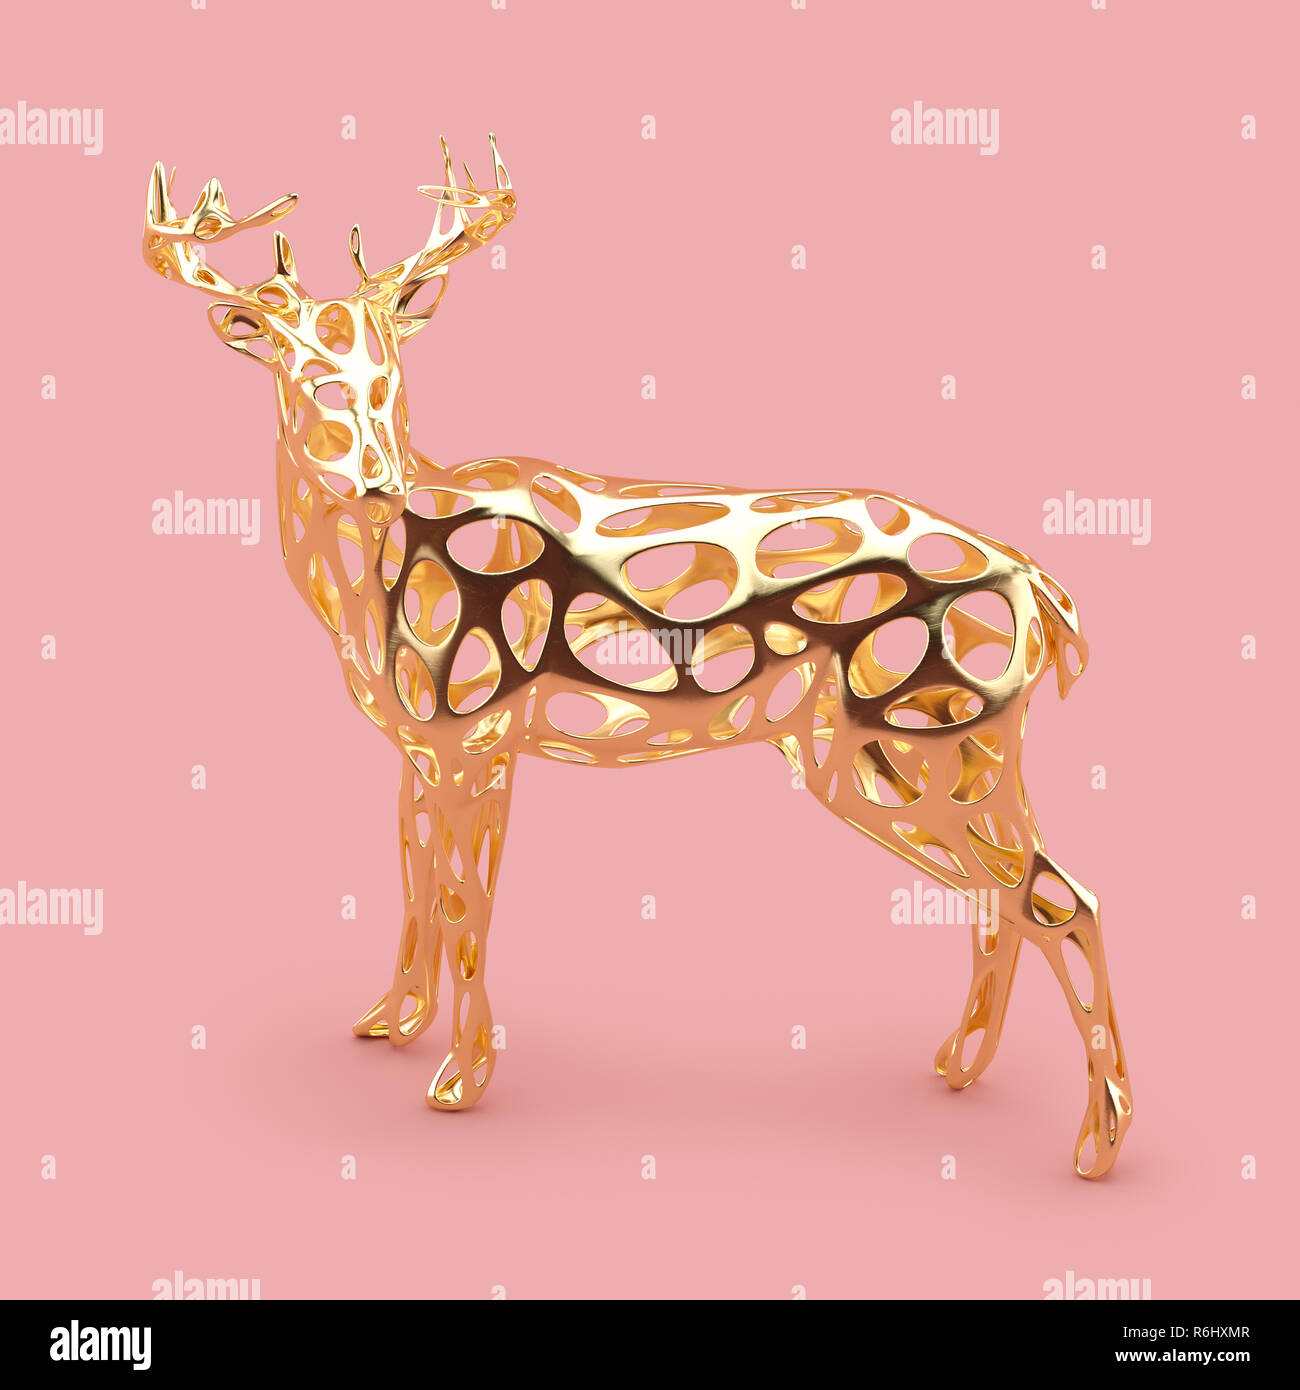 Abstract golden Christmas deer statuette on rose gold background. Stock Photo